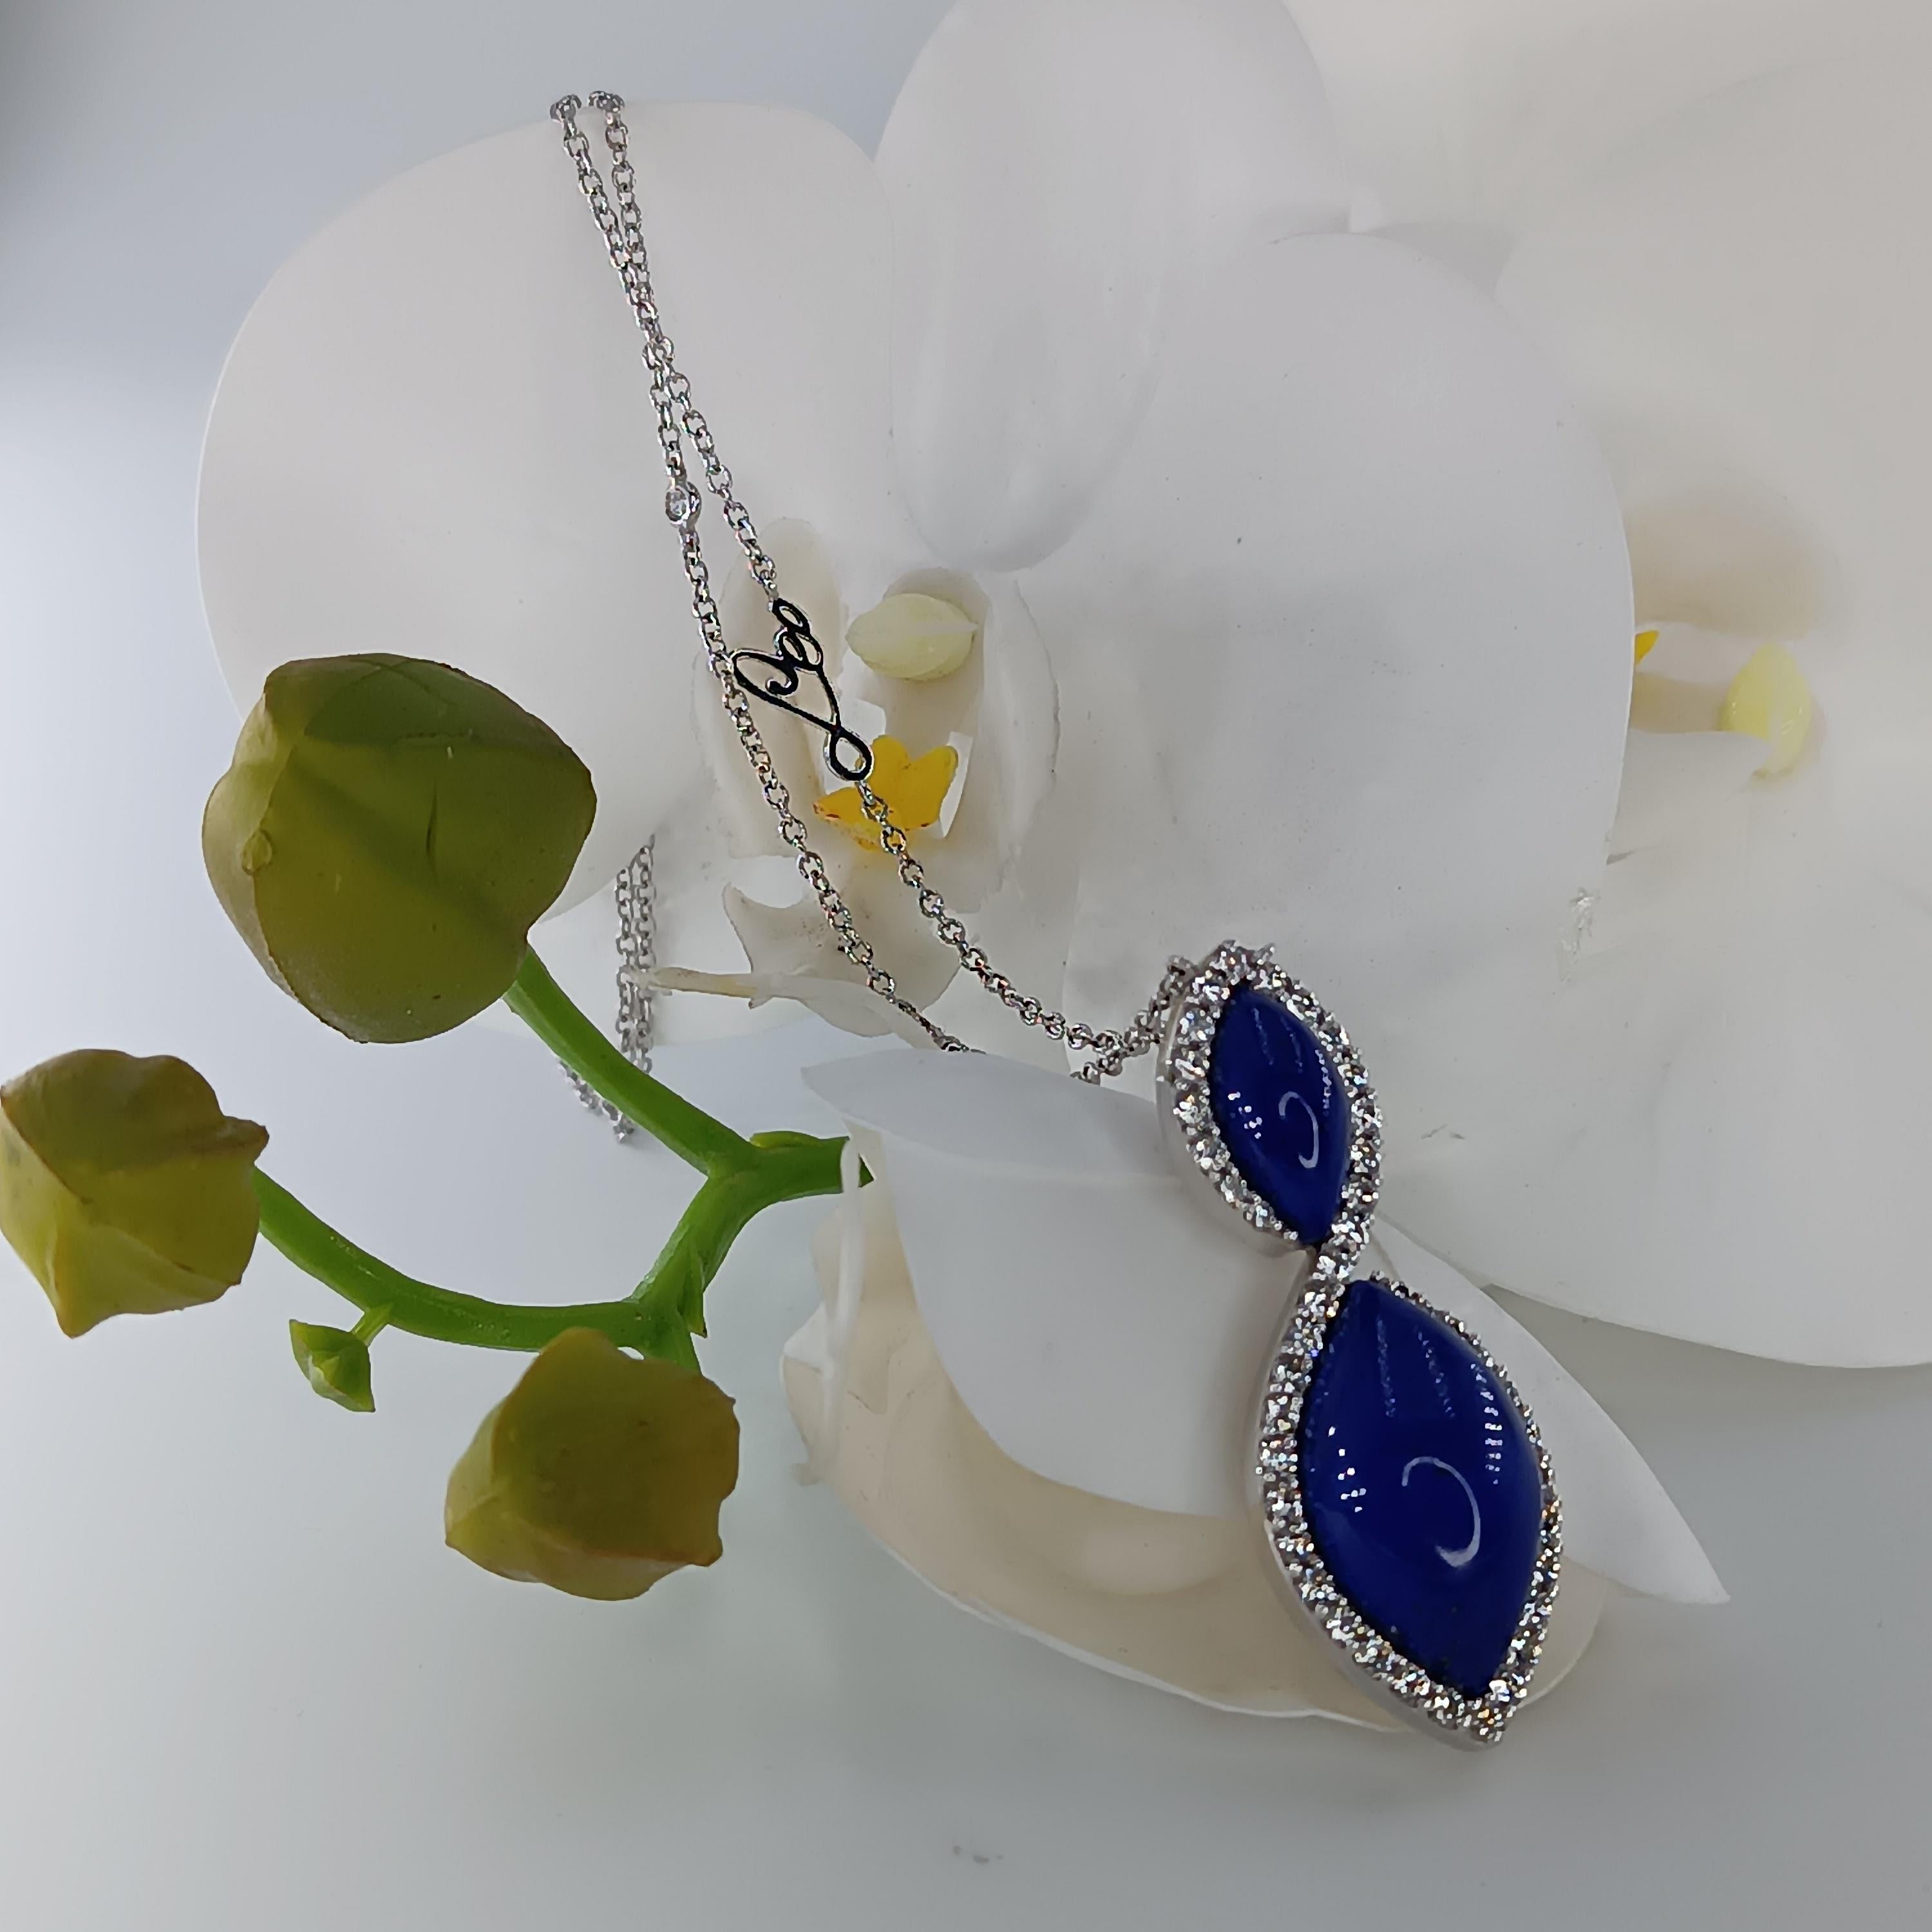 This wonderful Leo Milano pendant from our Pagano collection shows in every detail a very complicate yet perfectly done workmanship. The pendant and the chain are in 18 carat white gold with lapislazuli . The object weights 13,49 grams the total